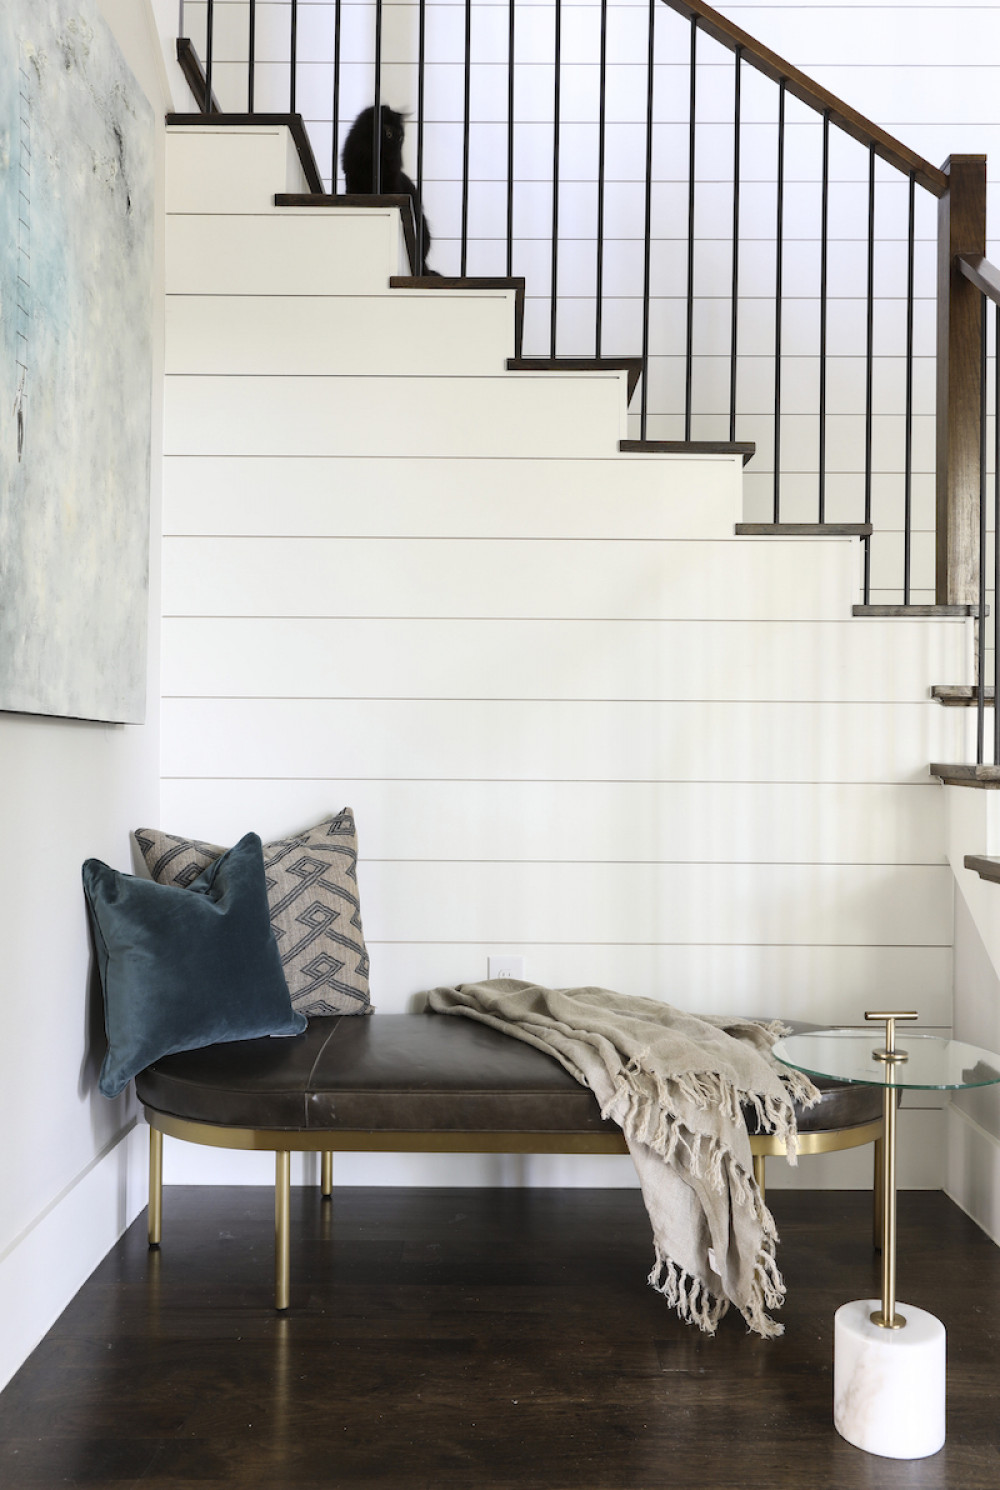 entry-foyer-bench-accent-pillows-throw-blanket